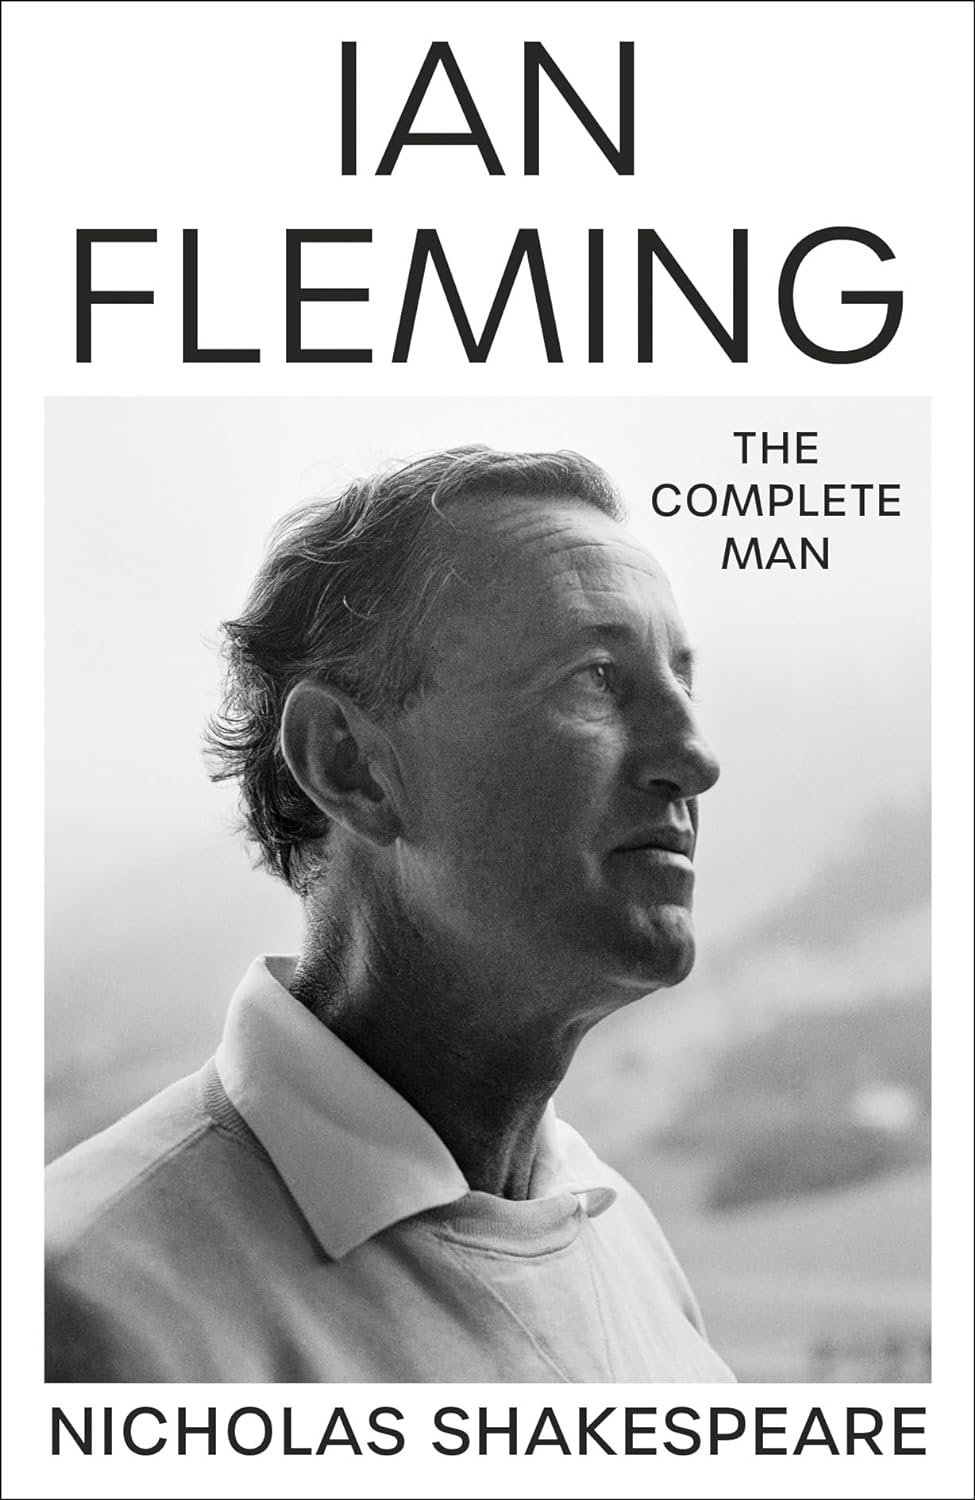 Shakespeare, Nicholas - Ian Fleming- The Complete Man ENG